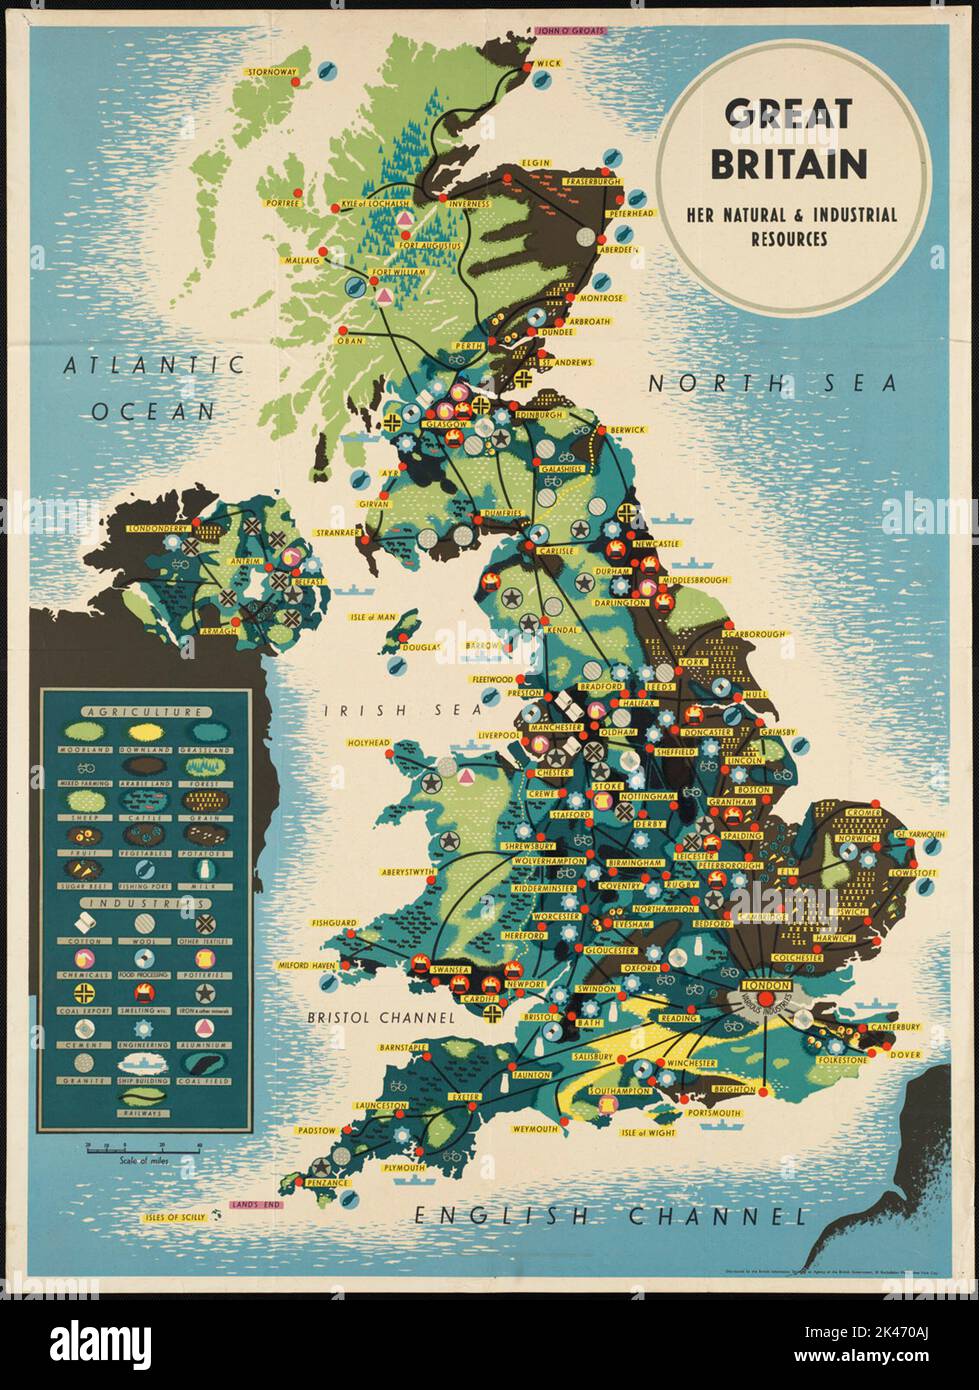 Colorful vintage travel poster map of Great Britain showing natural resources and industries Stock Photo